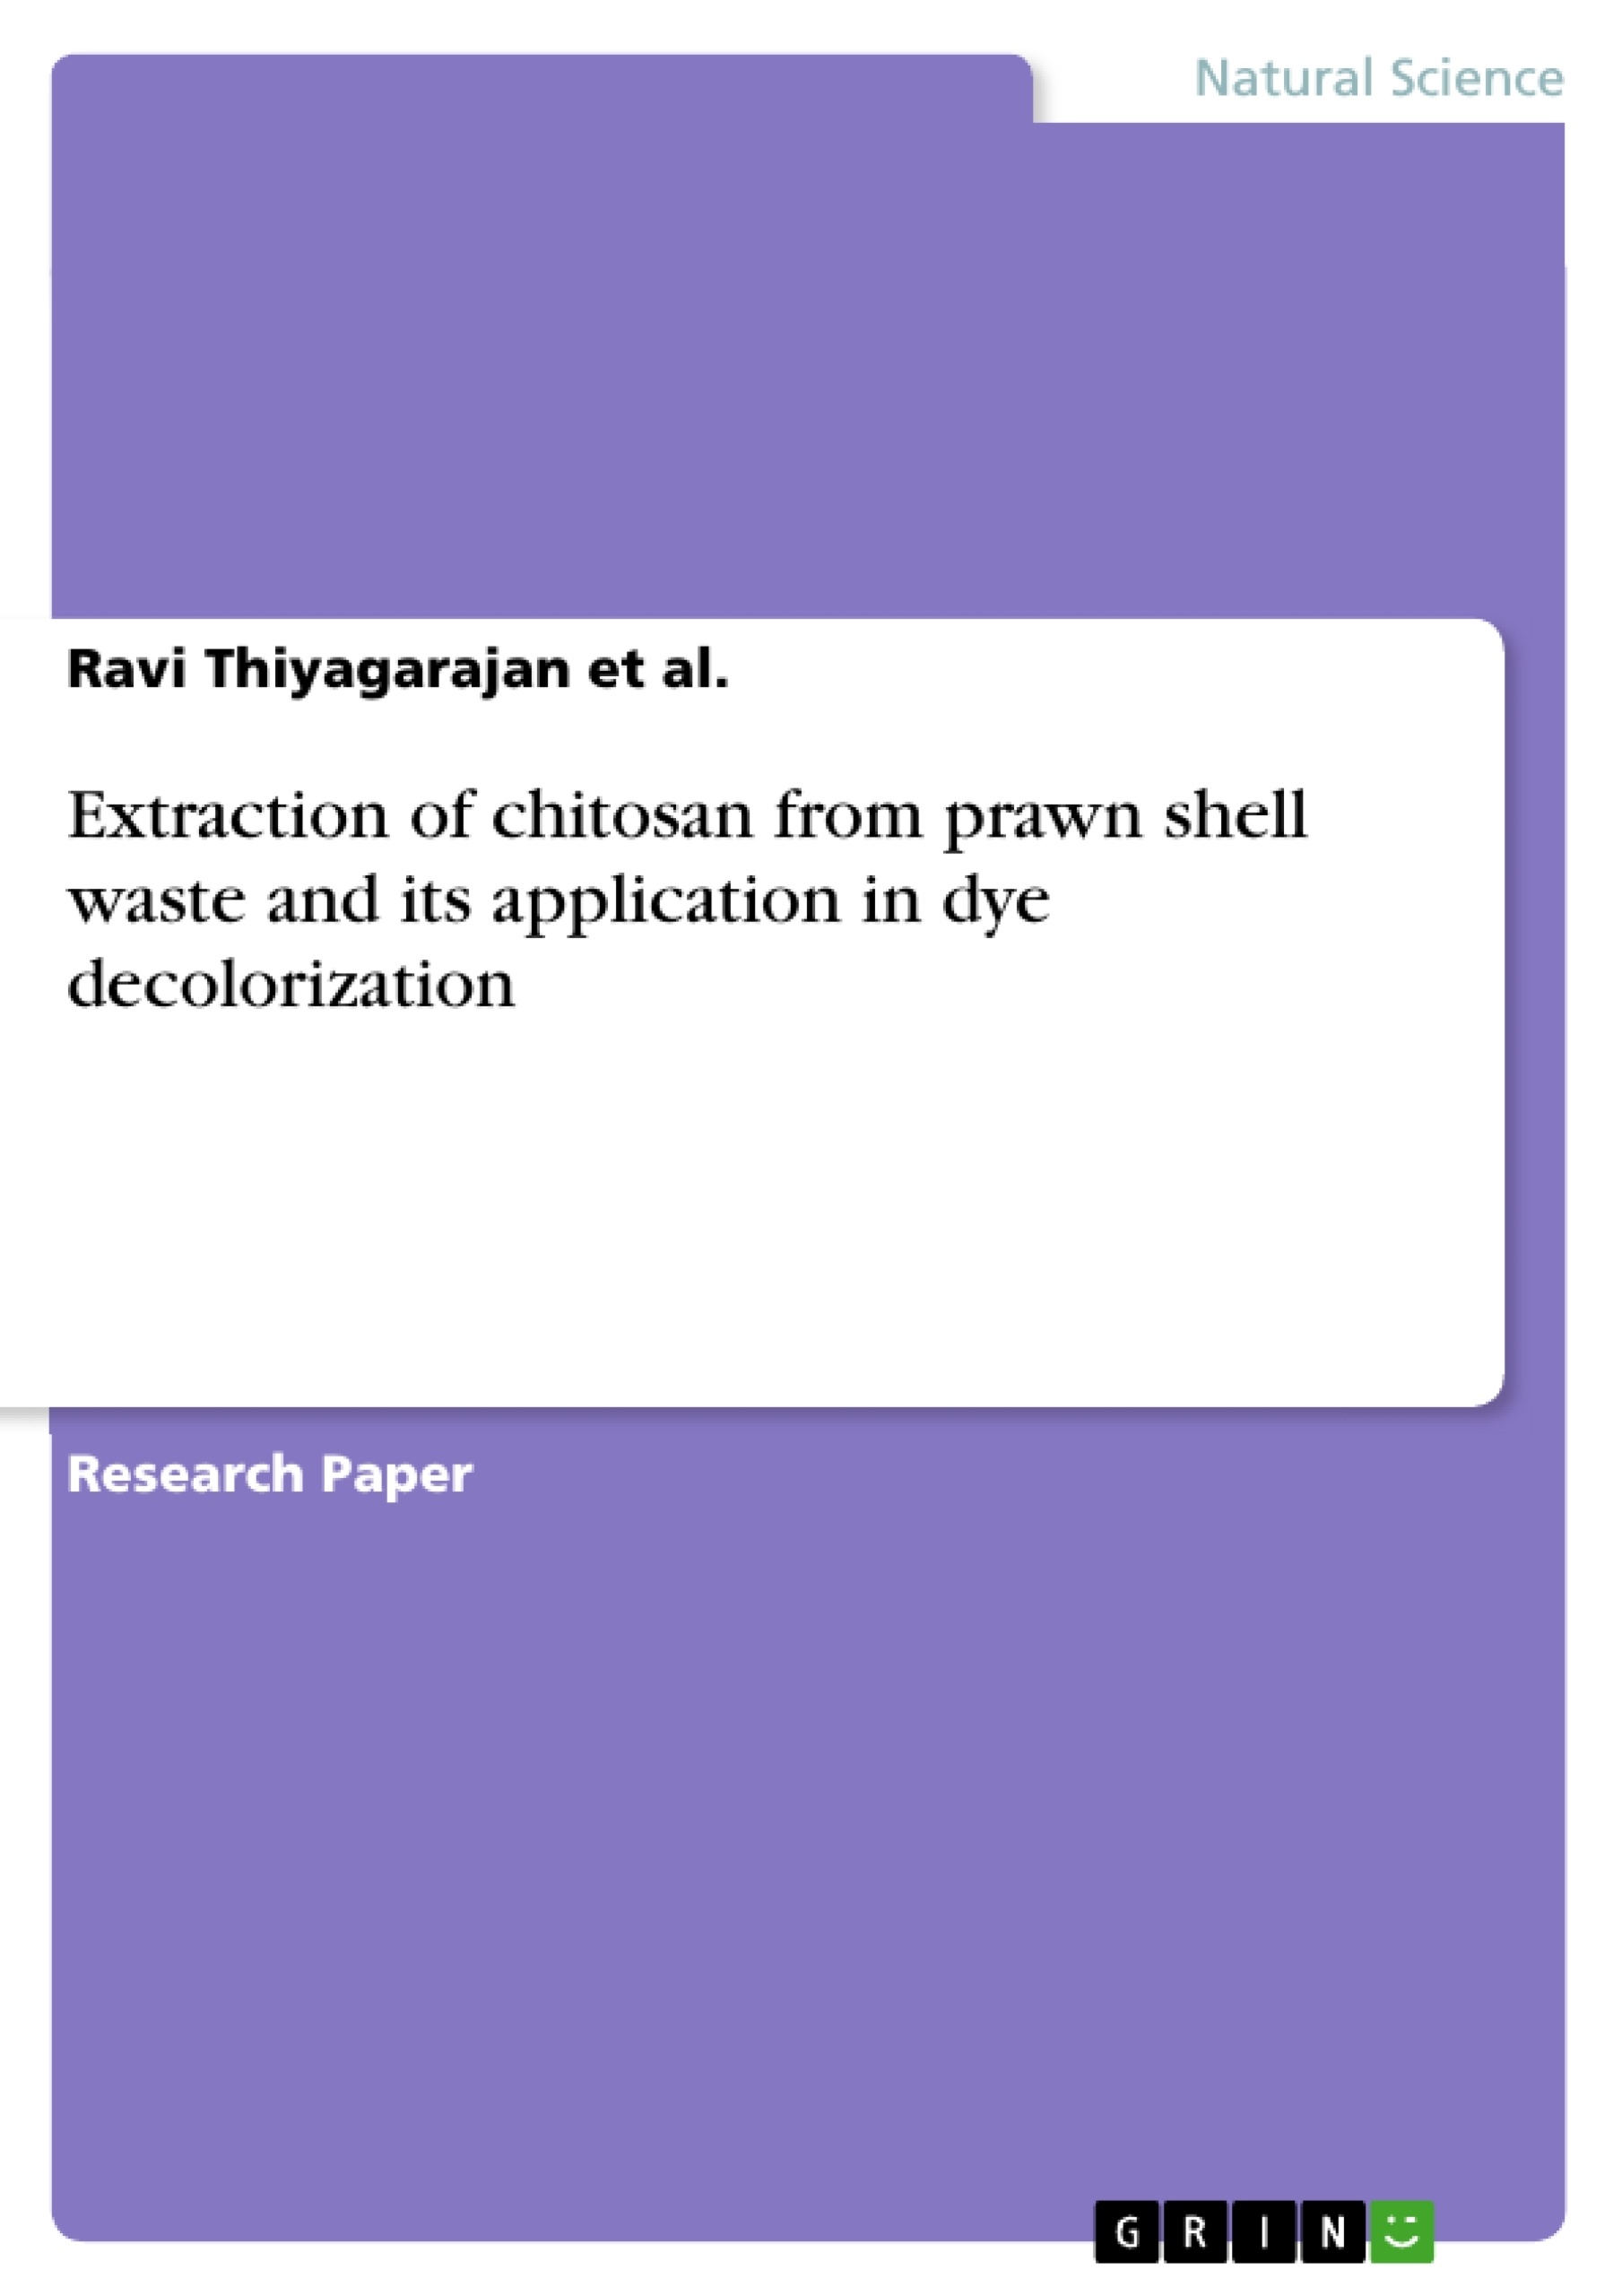 Title: Extraction of chitosan from prawn shell waste and its application in dye decolorization